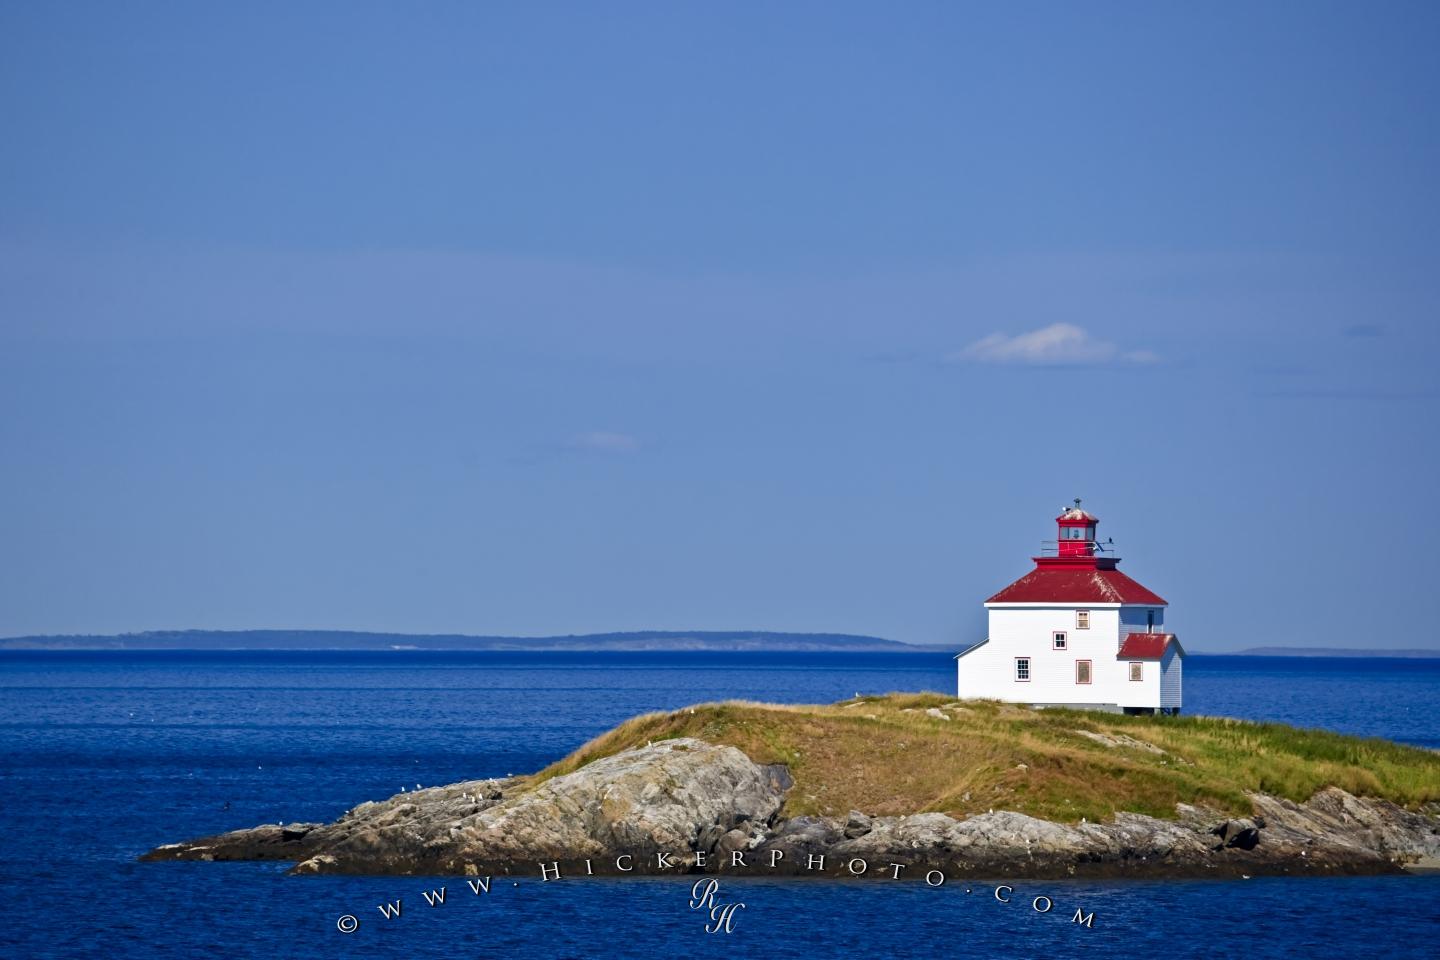 Background Wallpaper Queensport Lighthouse Chedabucto Bay Nova Scotia